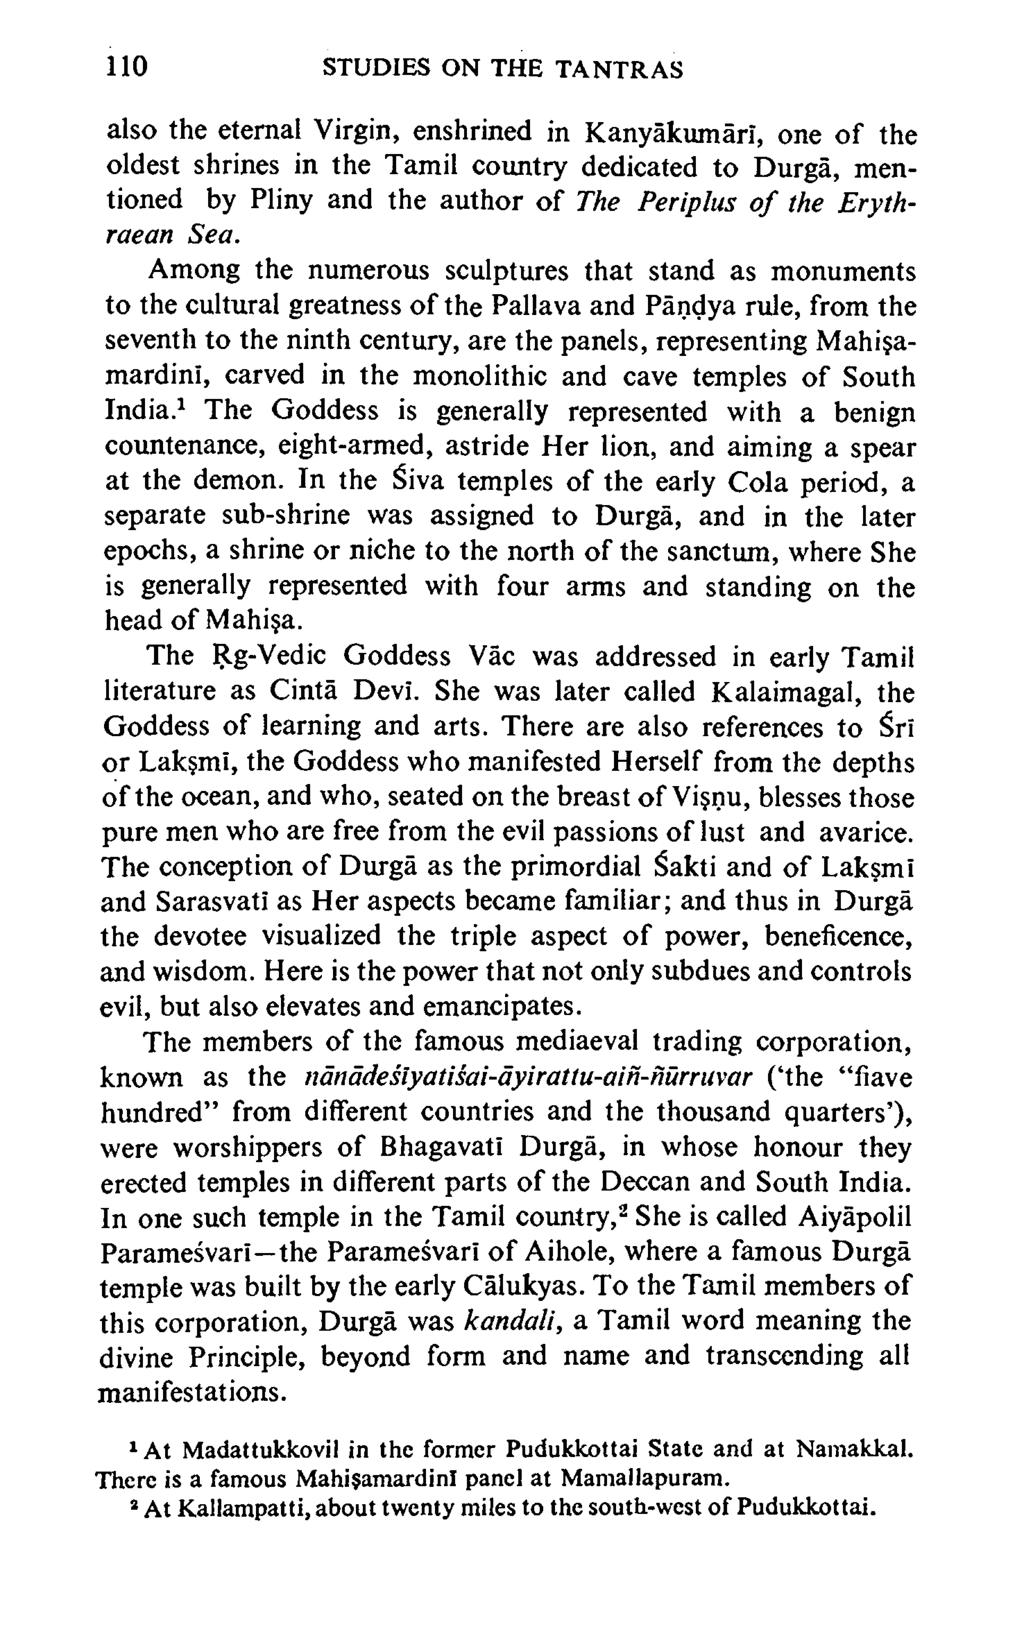 110 STUDIES ON THE TANTRAS also the eternal Virgin, enshrined in Kanyakumari, one o f the oldest shrines in the Tamil country dedicated to Durga, mentioned by Pliny and the author o f The Periplus o